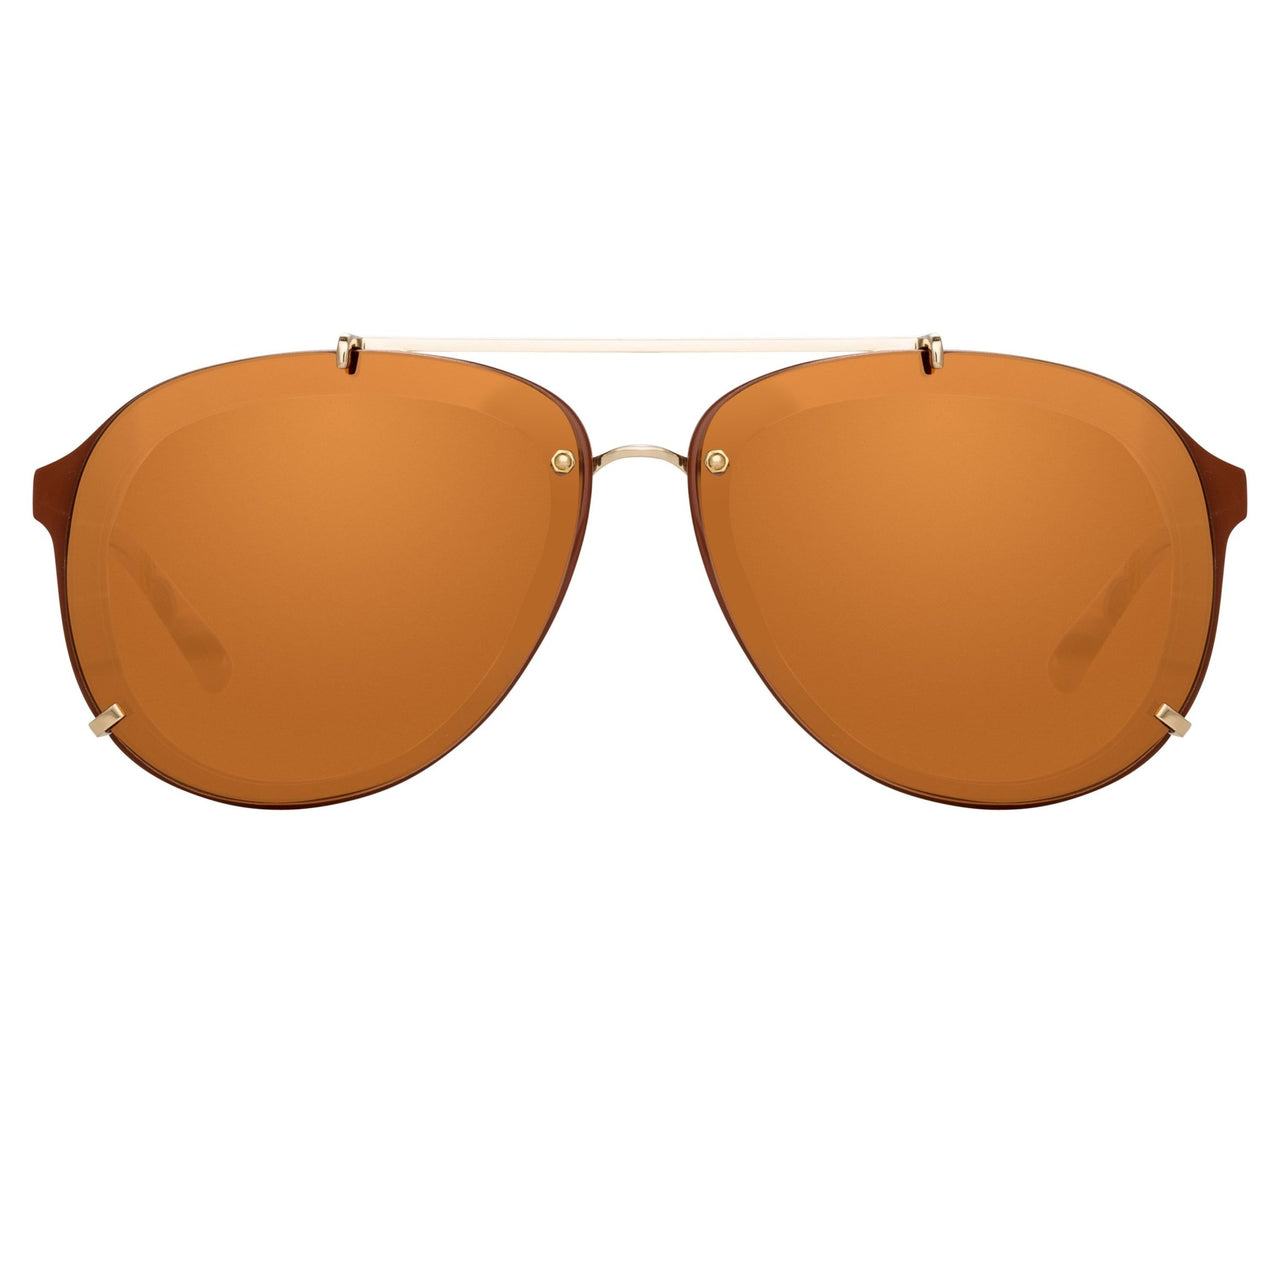 Phillip Lim Sunglasses Unisex Rust and Light Gold Aviator with Rust Mirror Lenses Category 3 - PL162C13SUN - Watches & Crystals